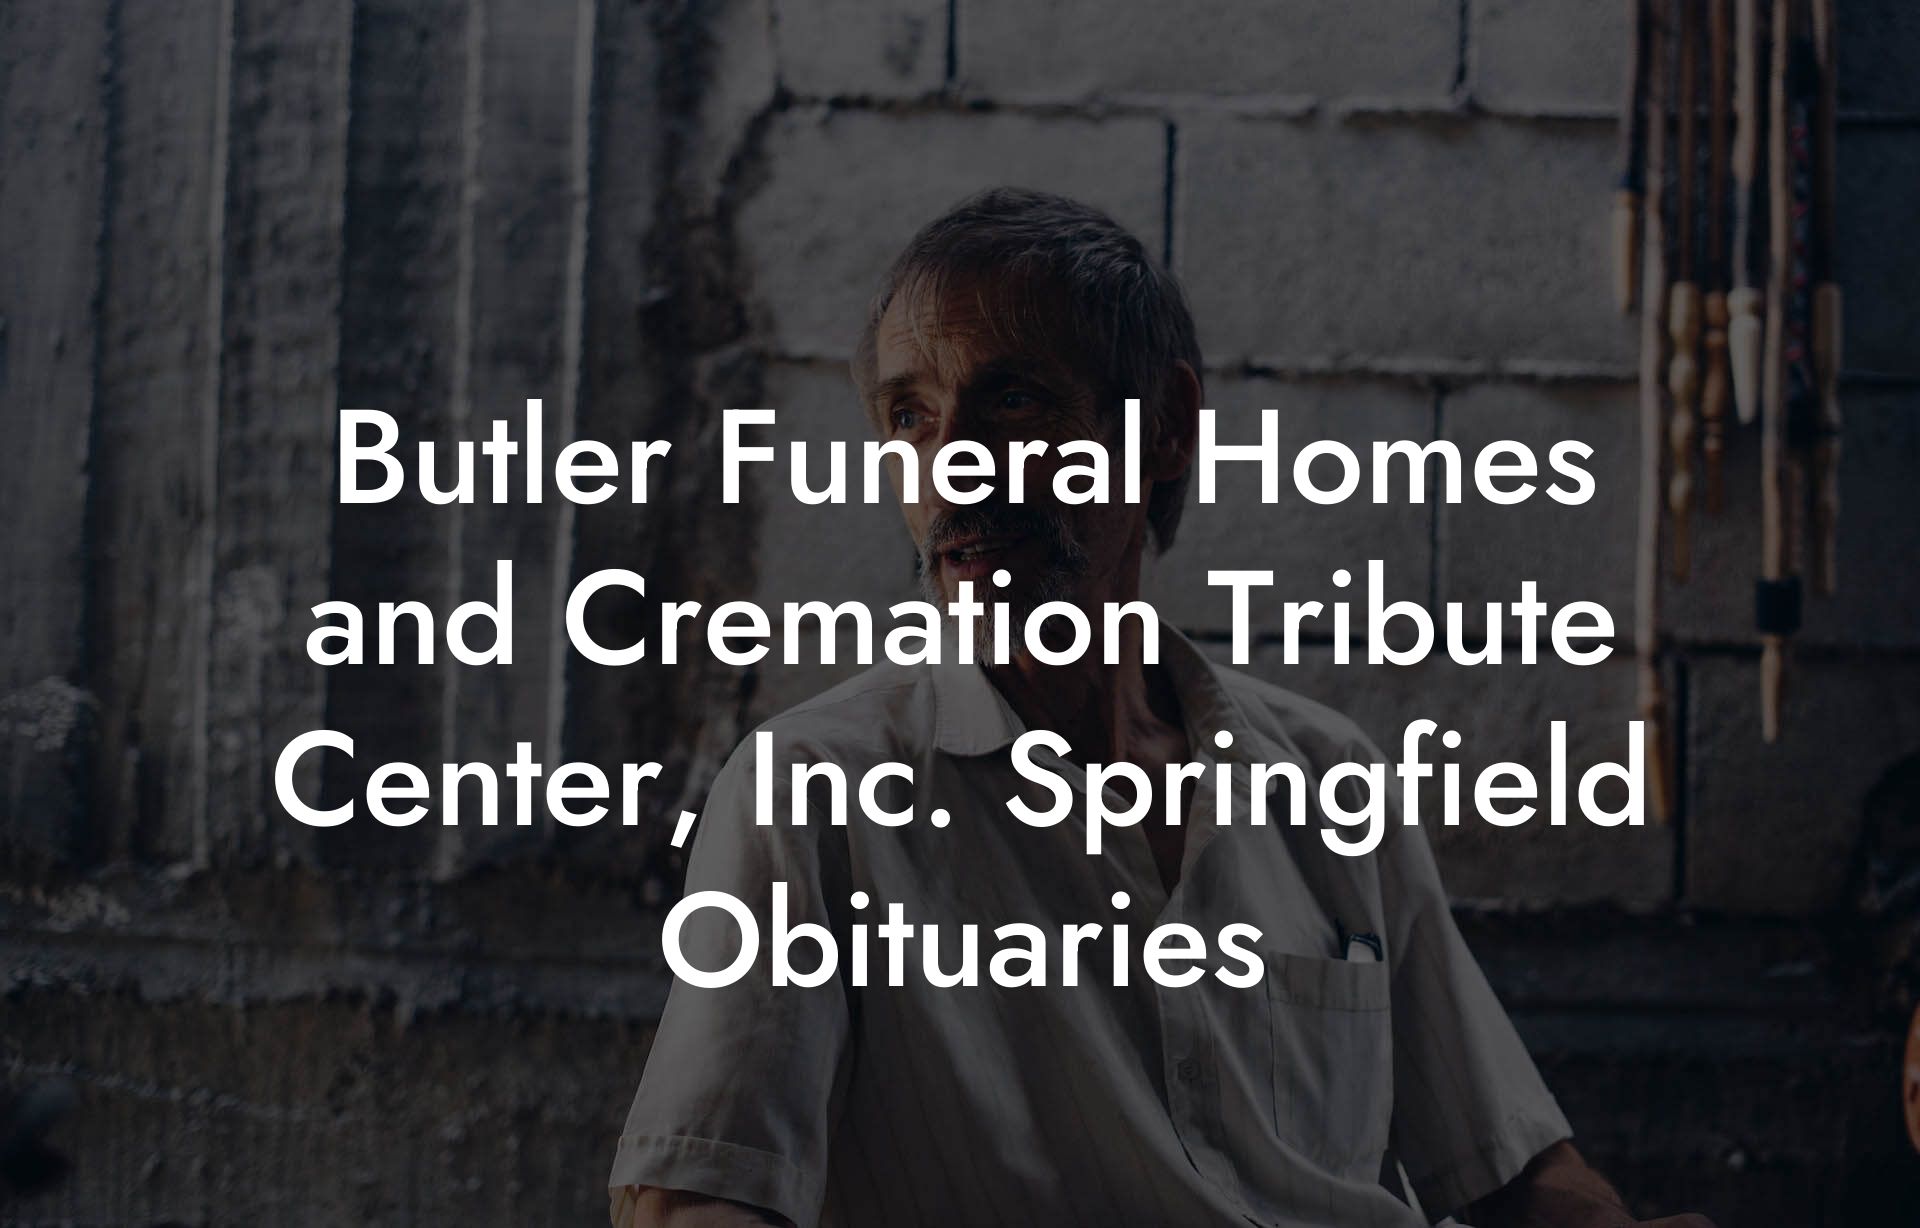 Butler Funeral Homes and Cremation Tribute Center, Inc. Springfield Obituaries